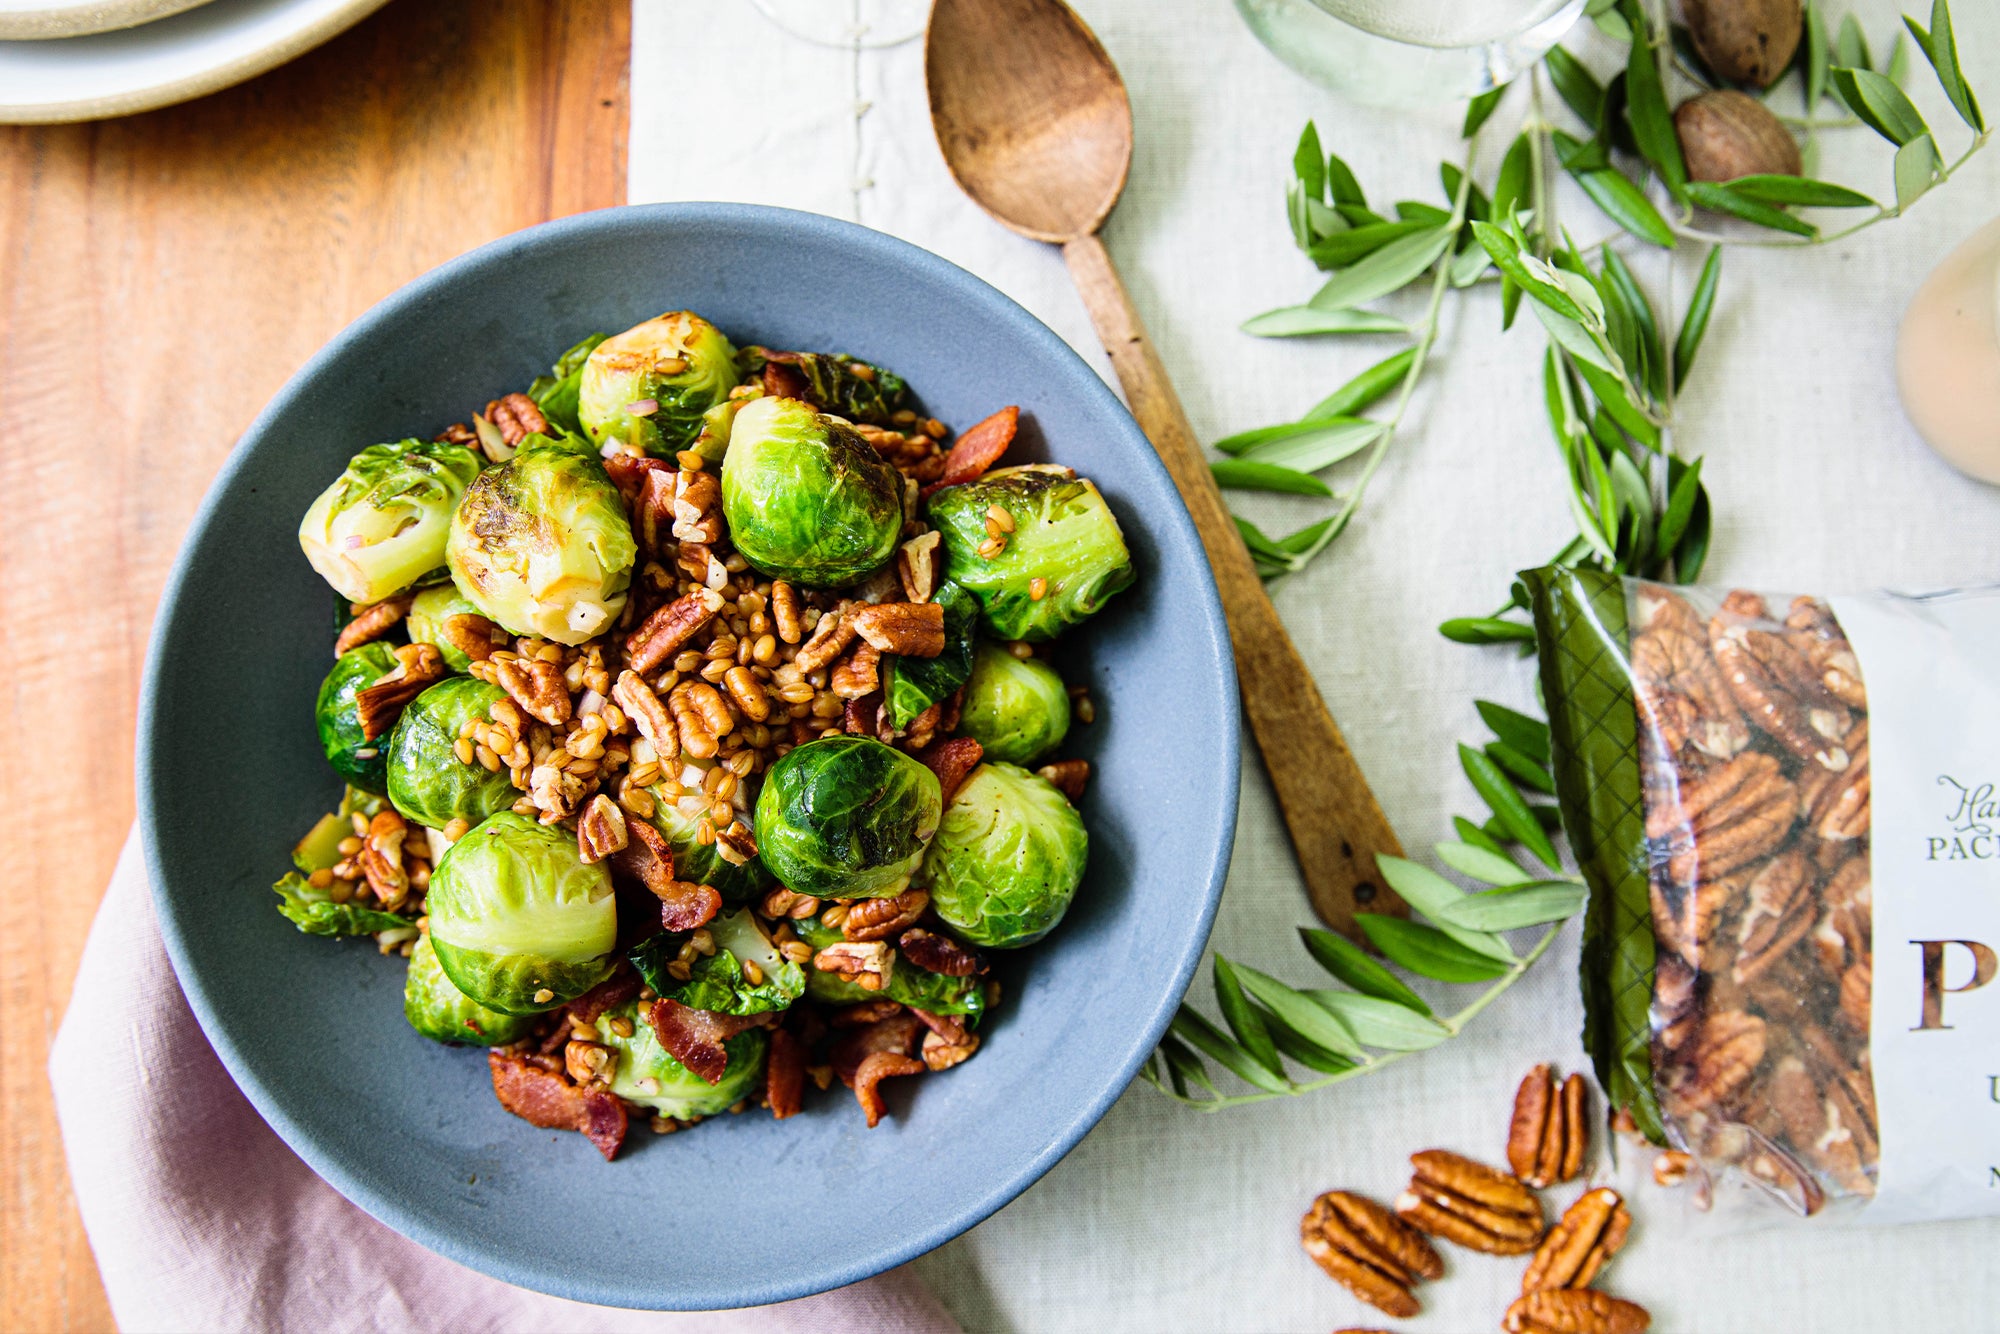 Pan-Roasted Brussels Sprouts with Warm Bacon-Pecan Vinaigrette